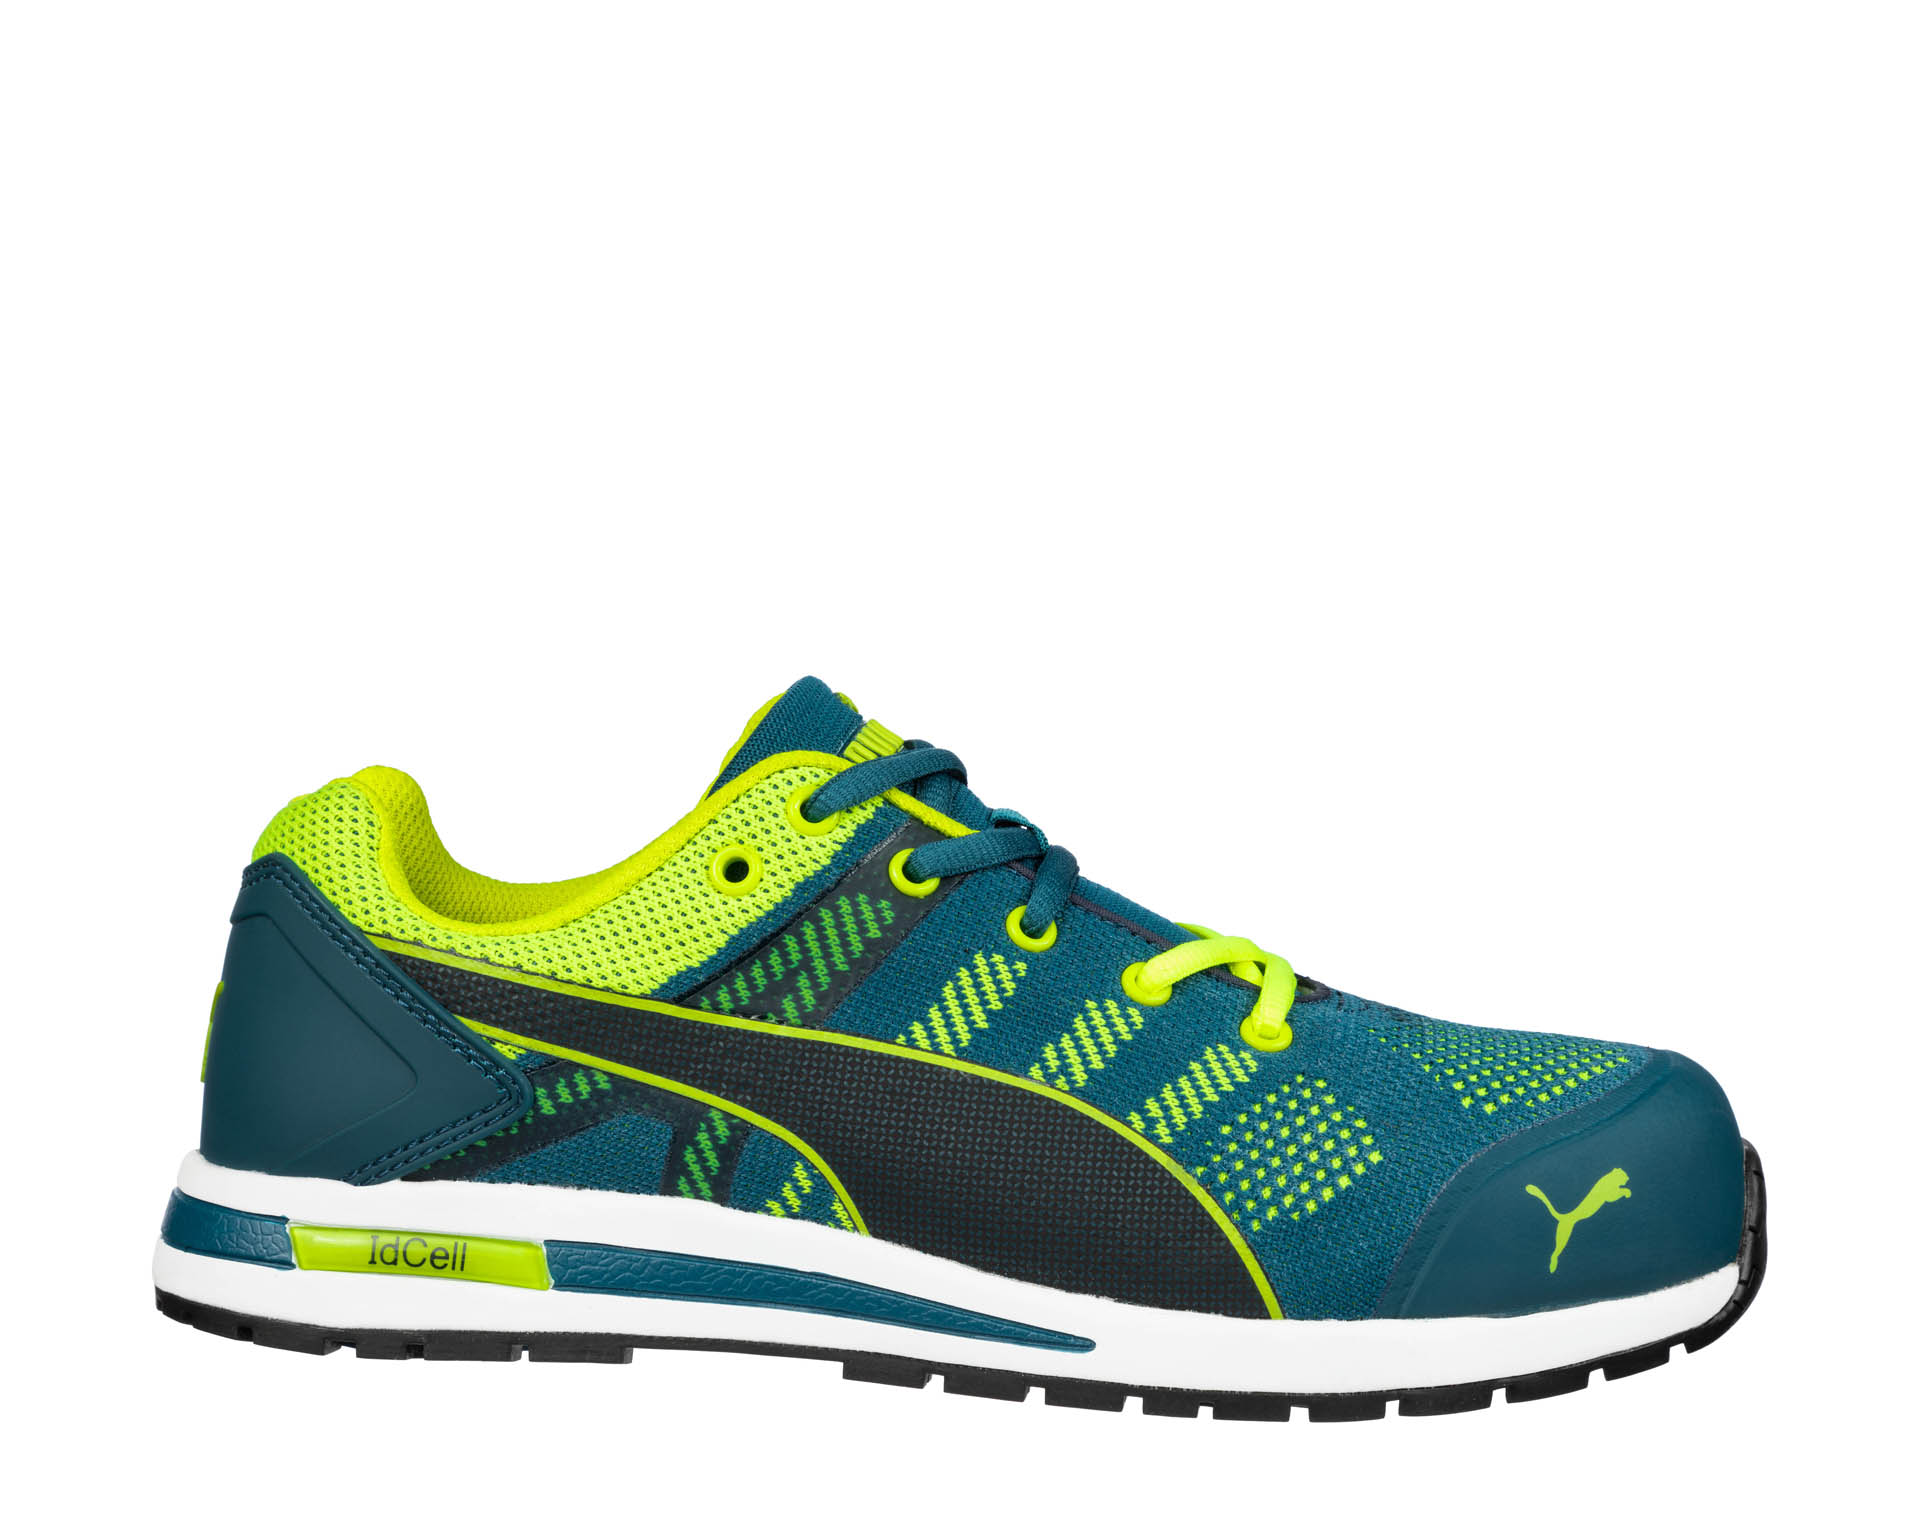 PUMA SAFETY Puma English GREEN ELEVATE S1P ESD LOW KNIT safety shoes | HRO Safety SRC